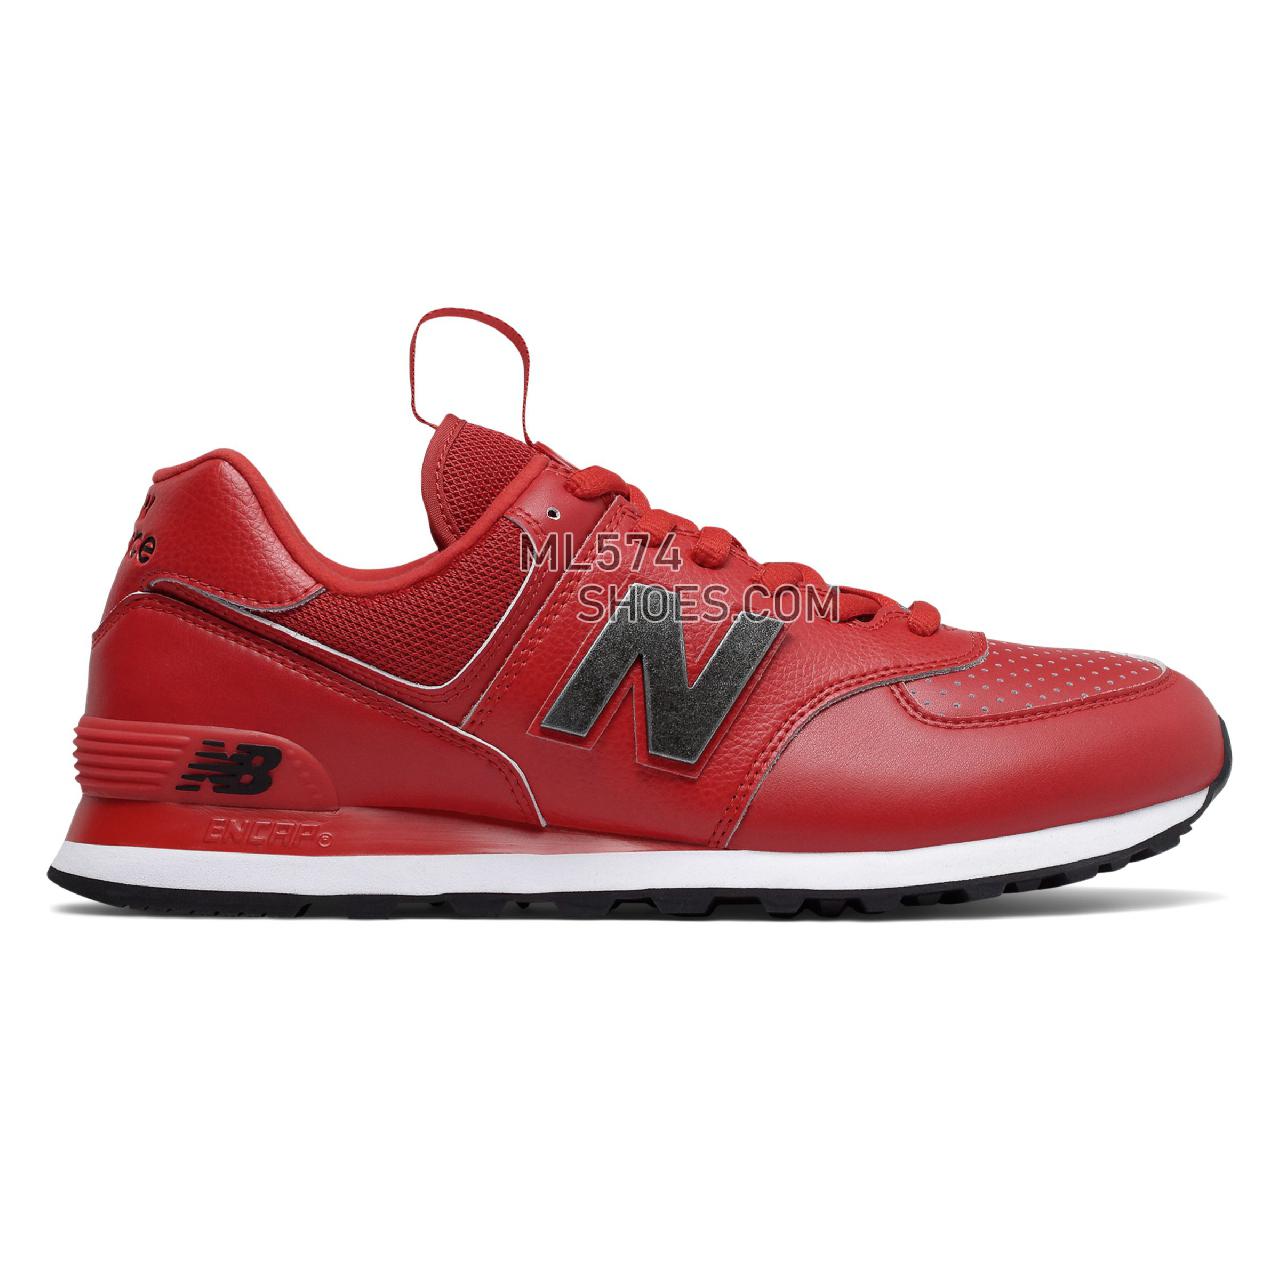 New Balance 574 - Men's Classic Sneakers - Team Red with Black - ML574SOY